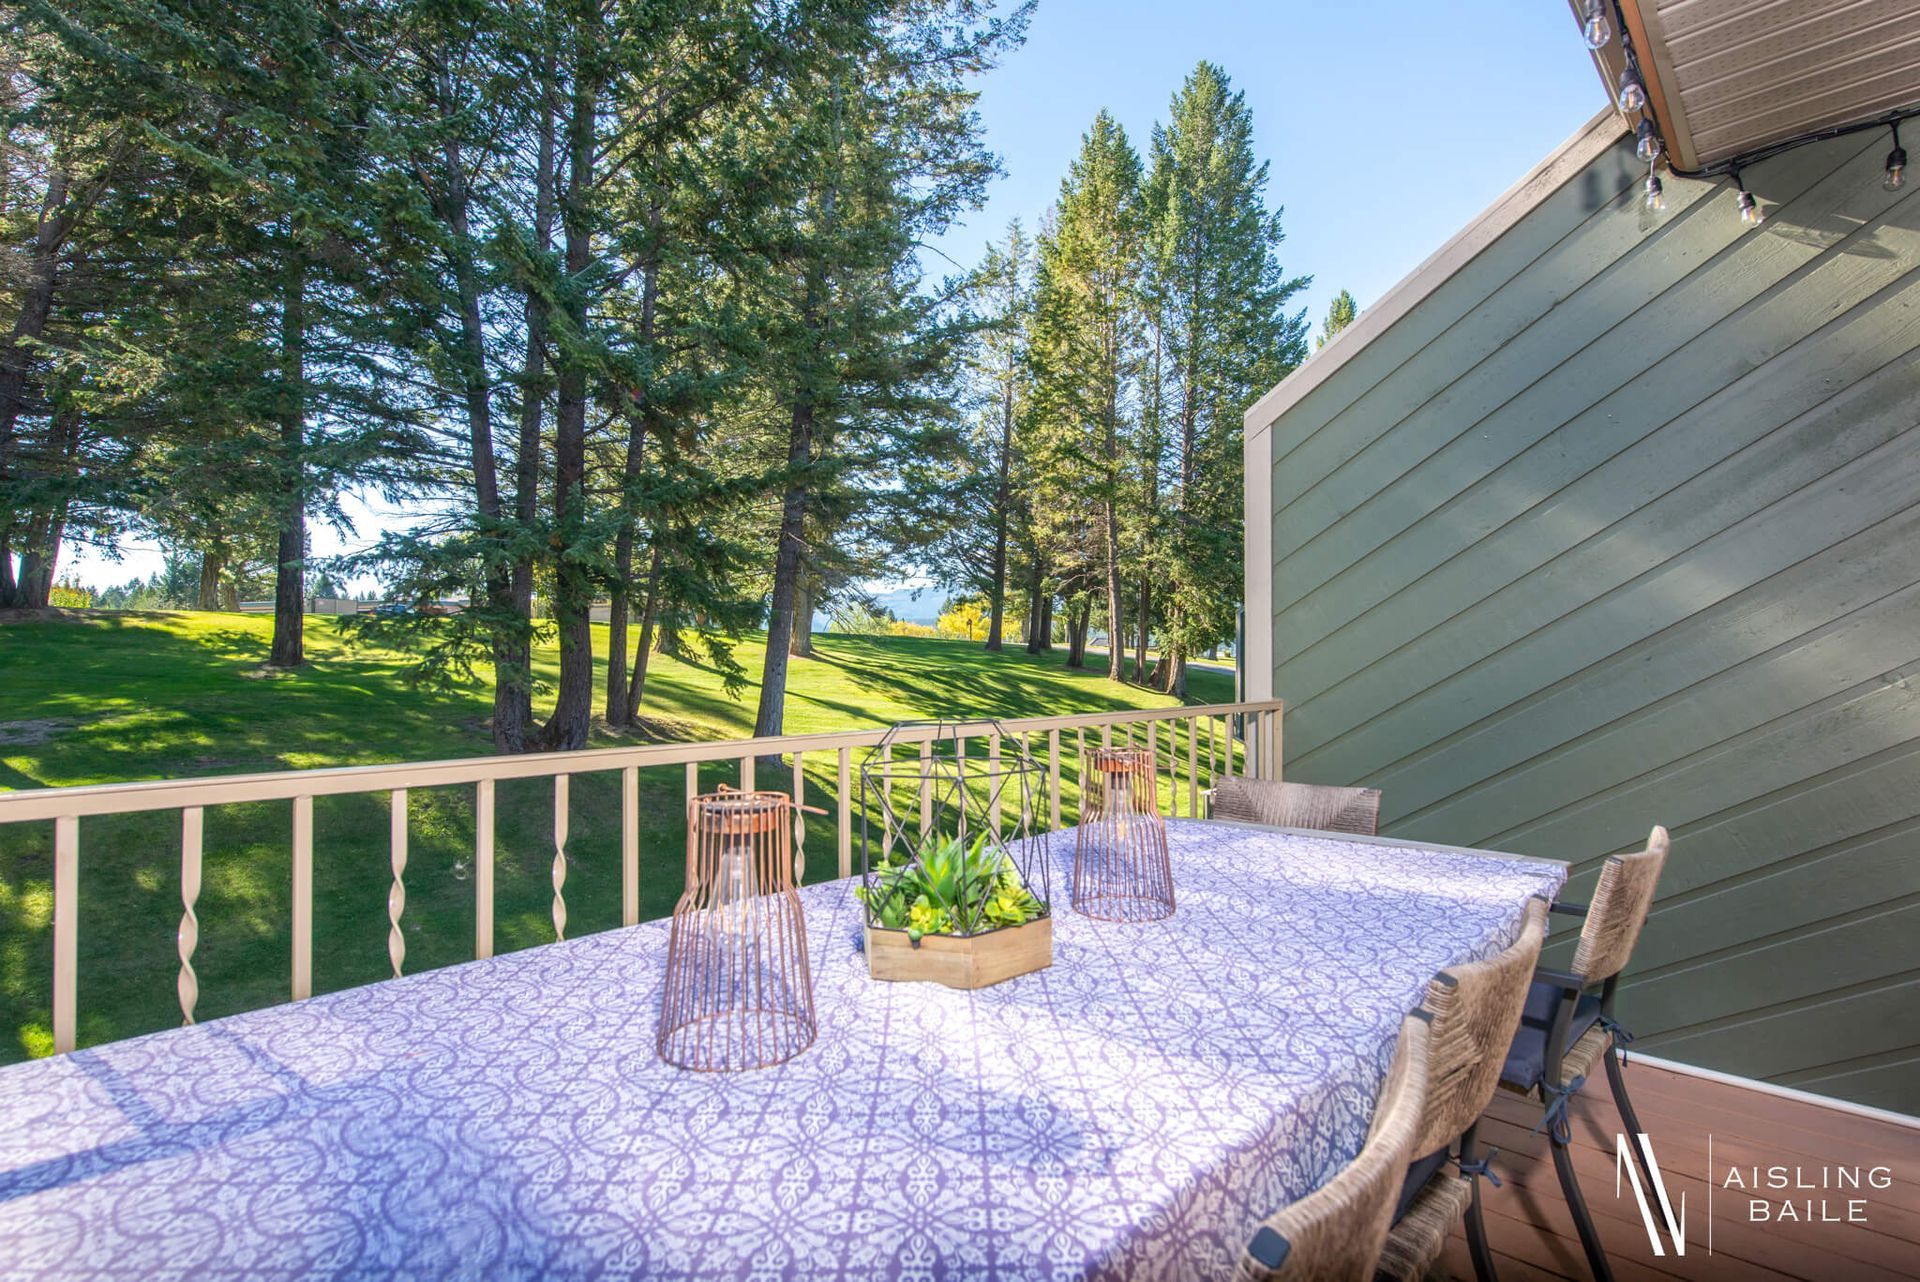 Private patio of Cherished Memories, an Invermere Windermere BC Vacation Rental hosted by Aisling Baile Property Management.